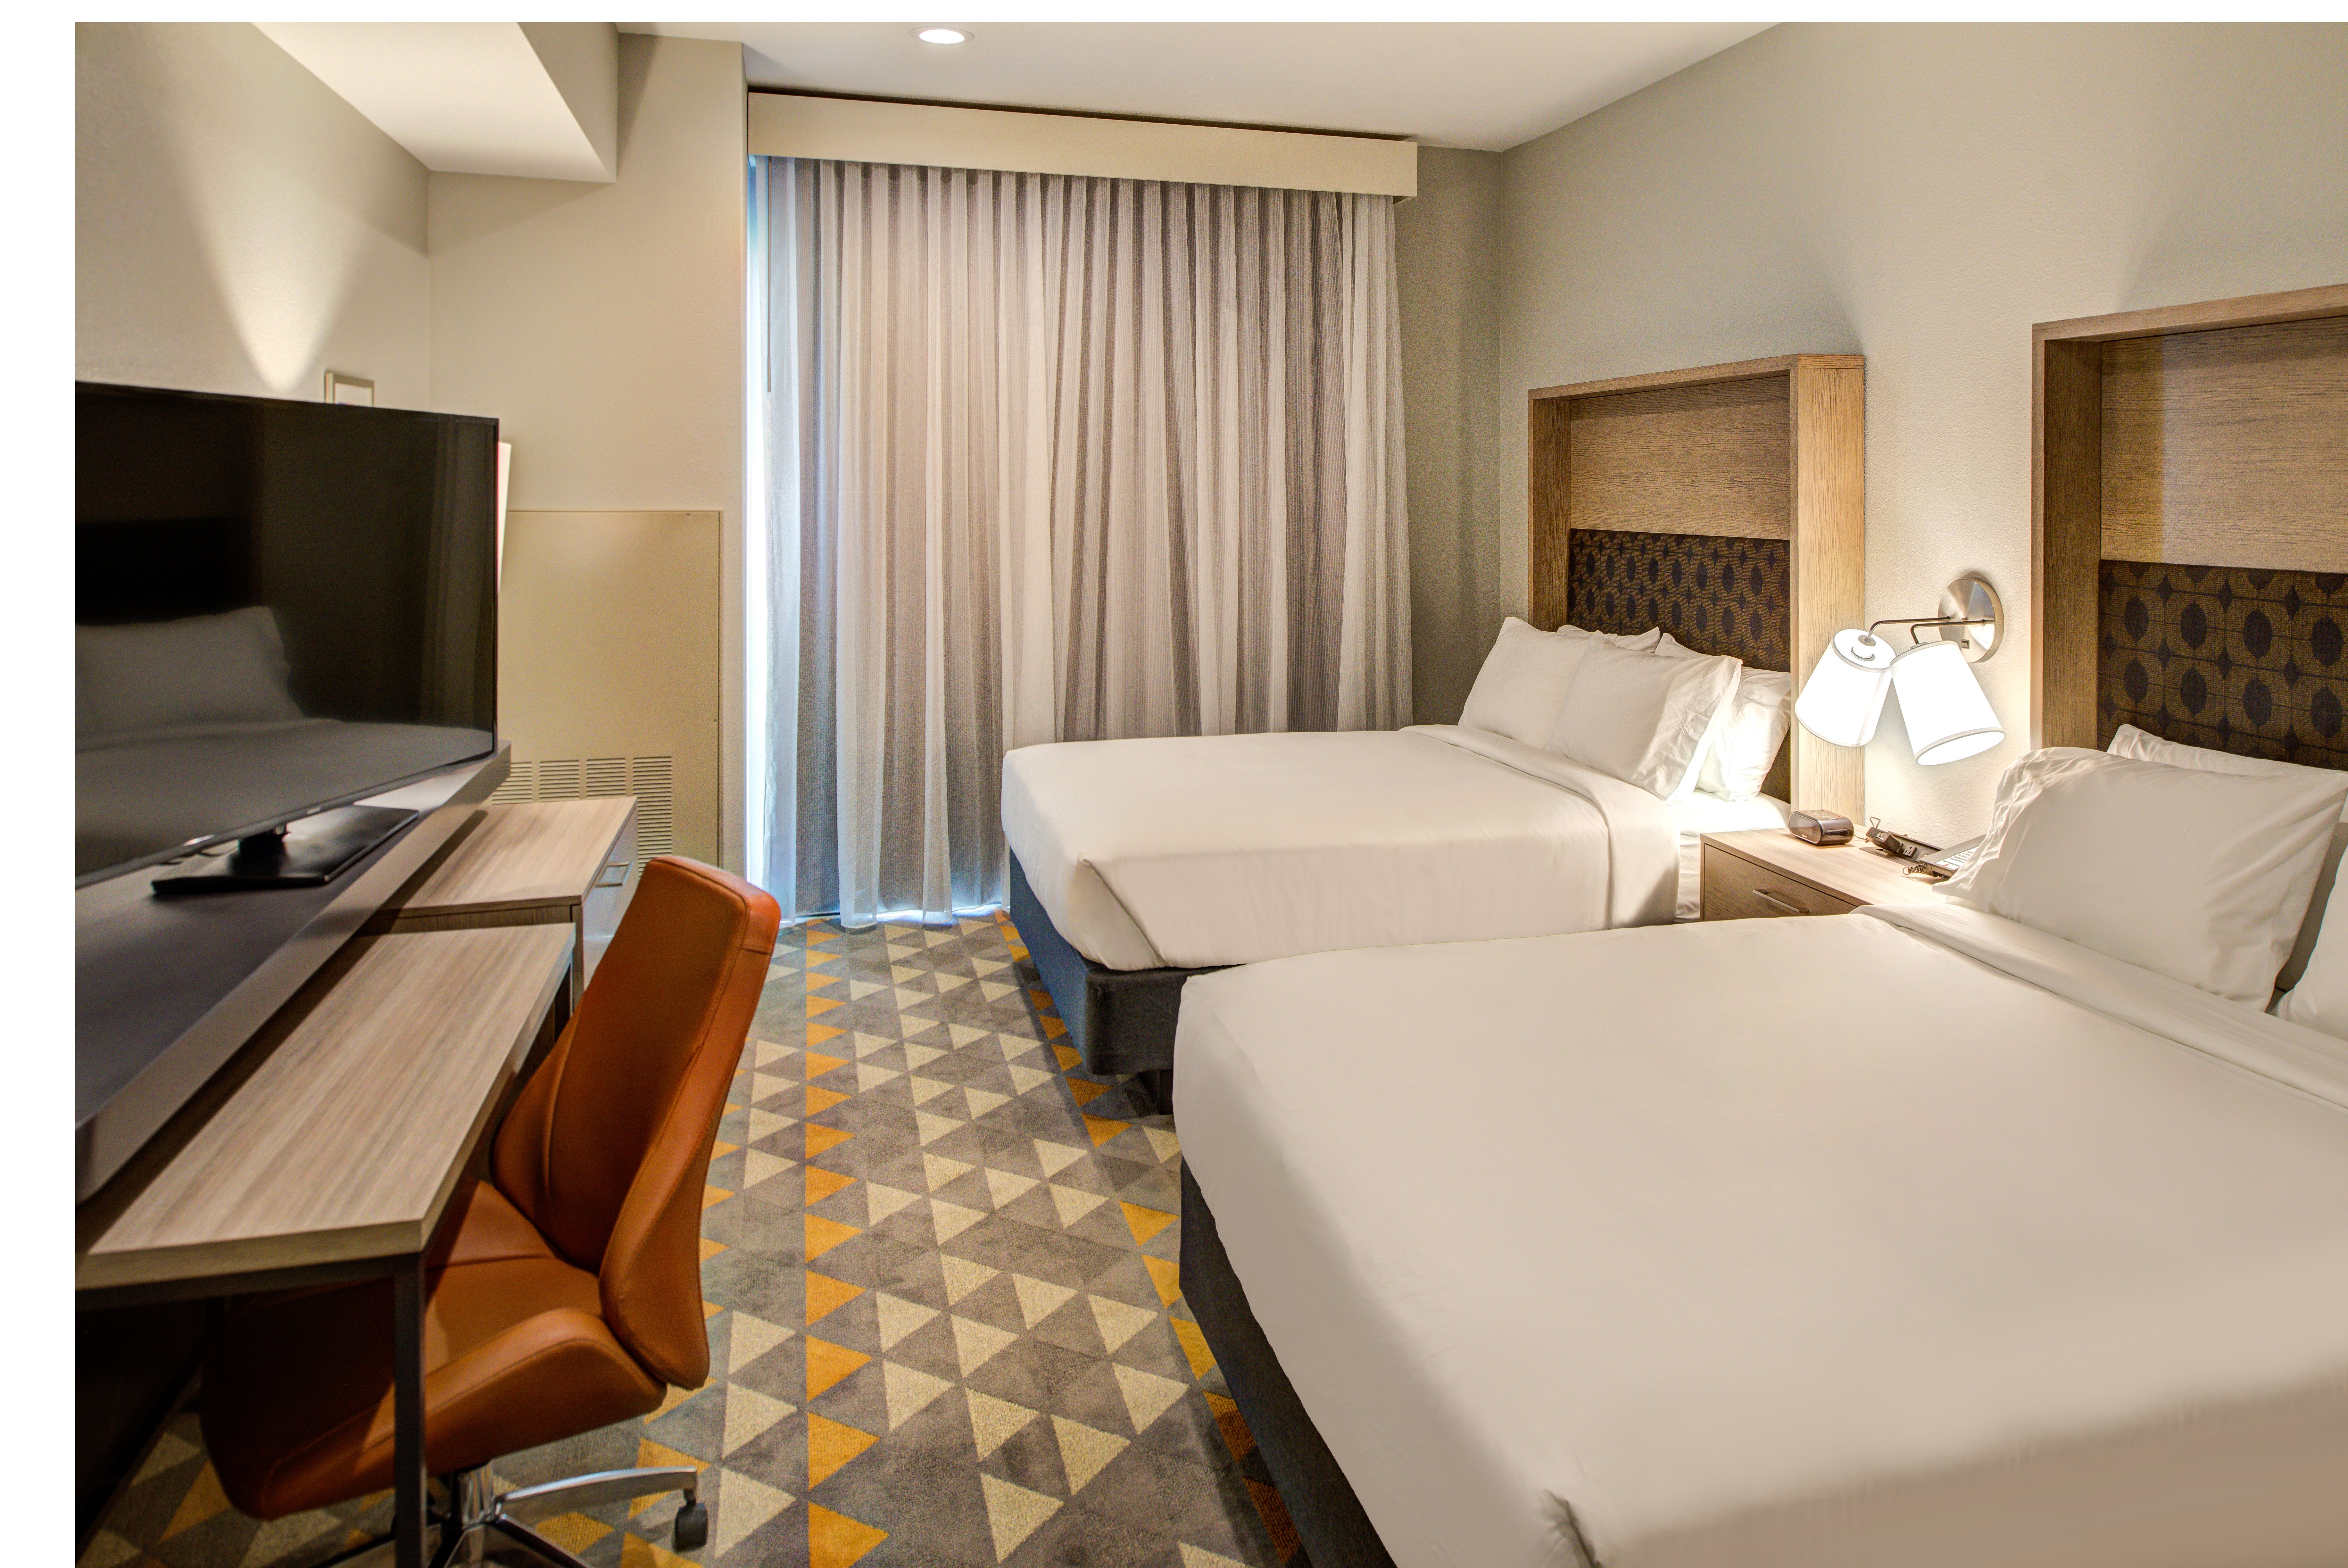 Our Suites feature premium furniture and thoughtful design